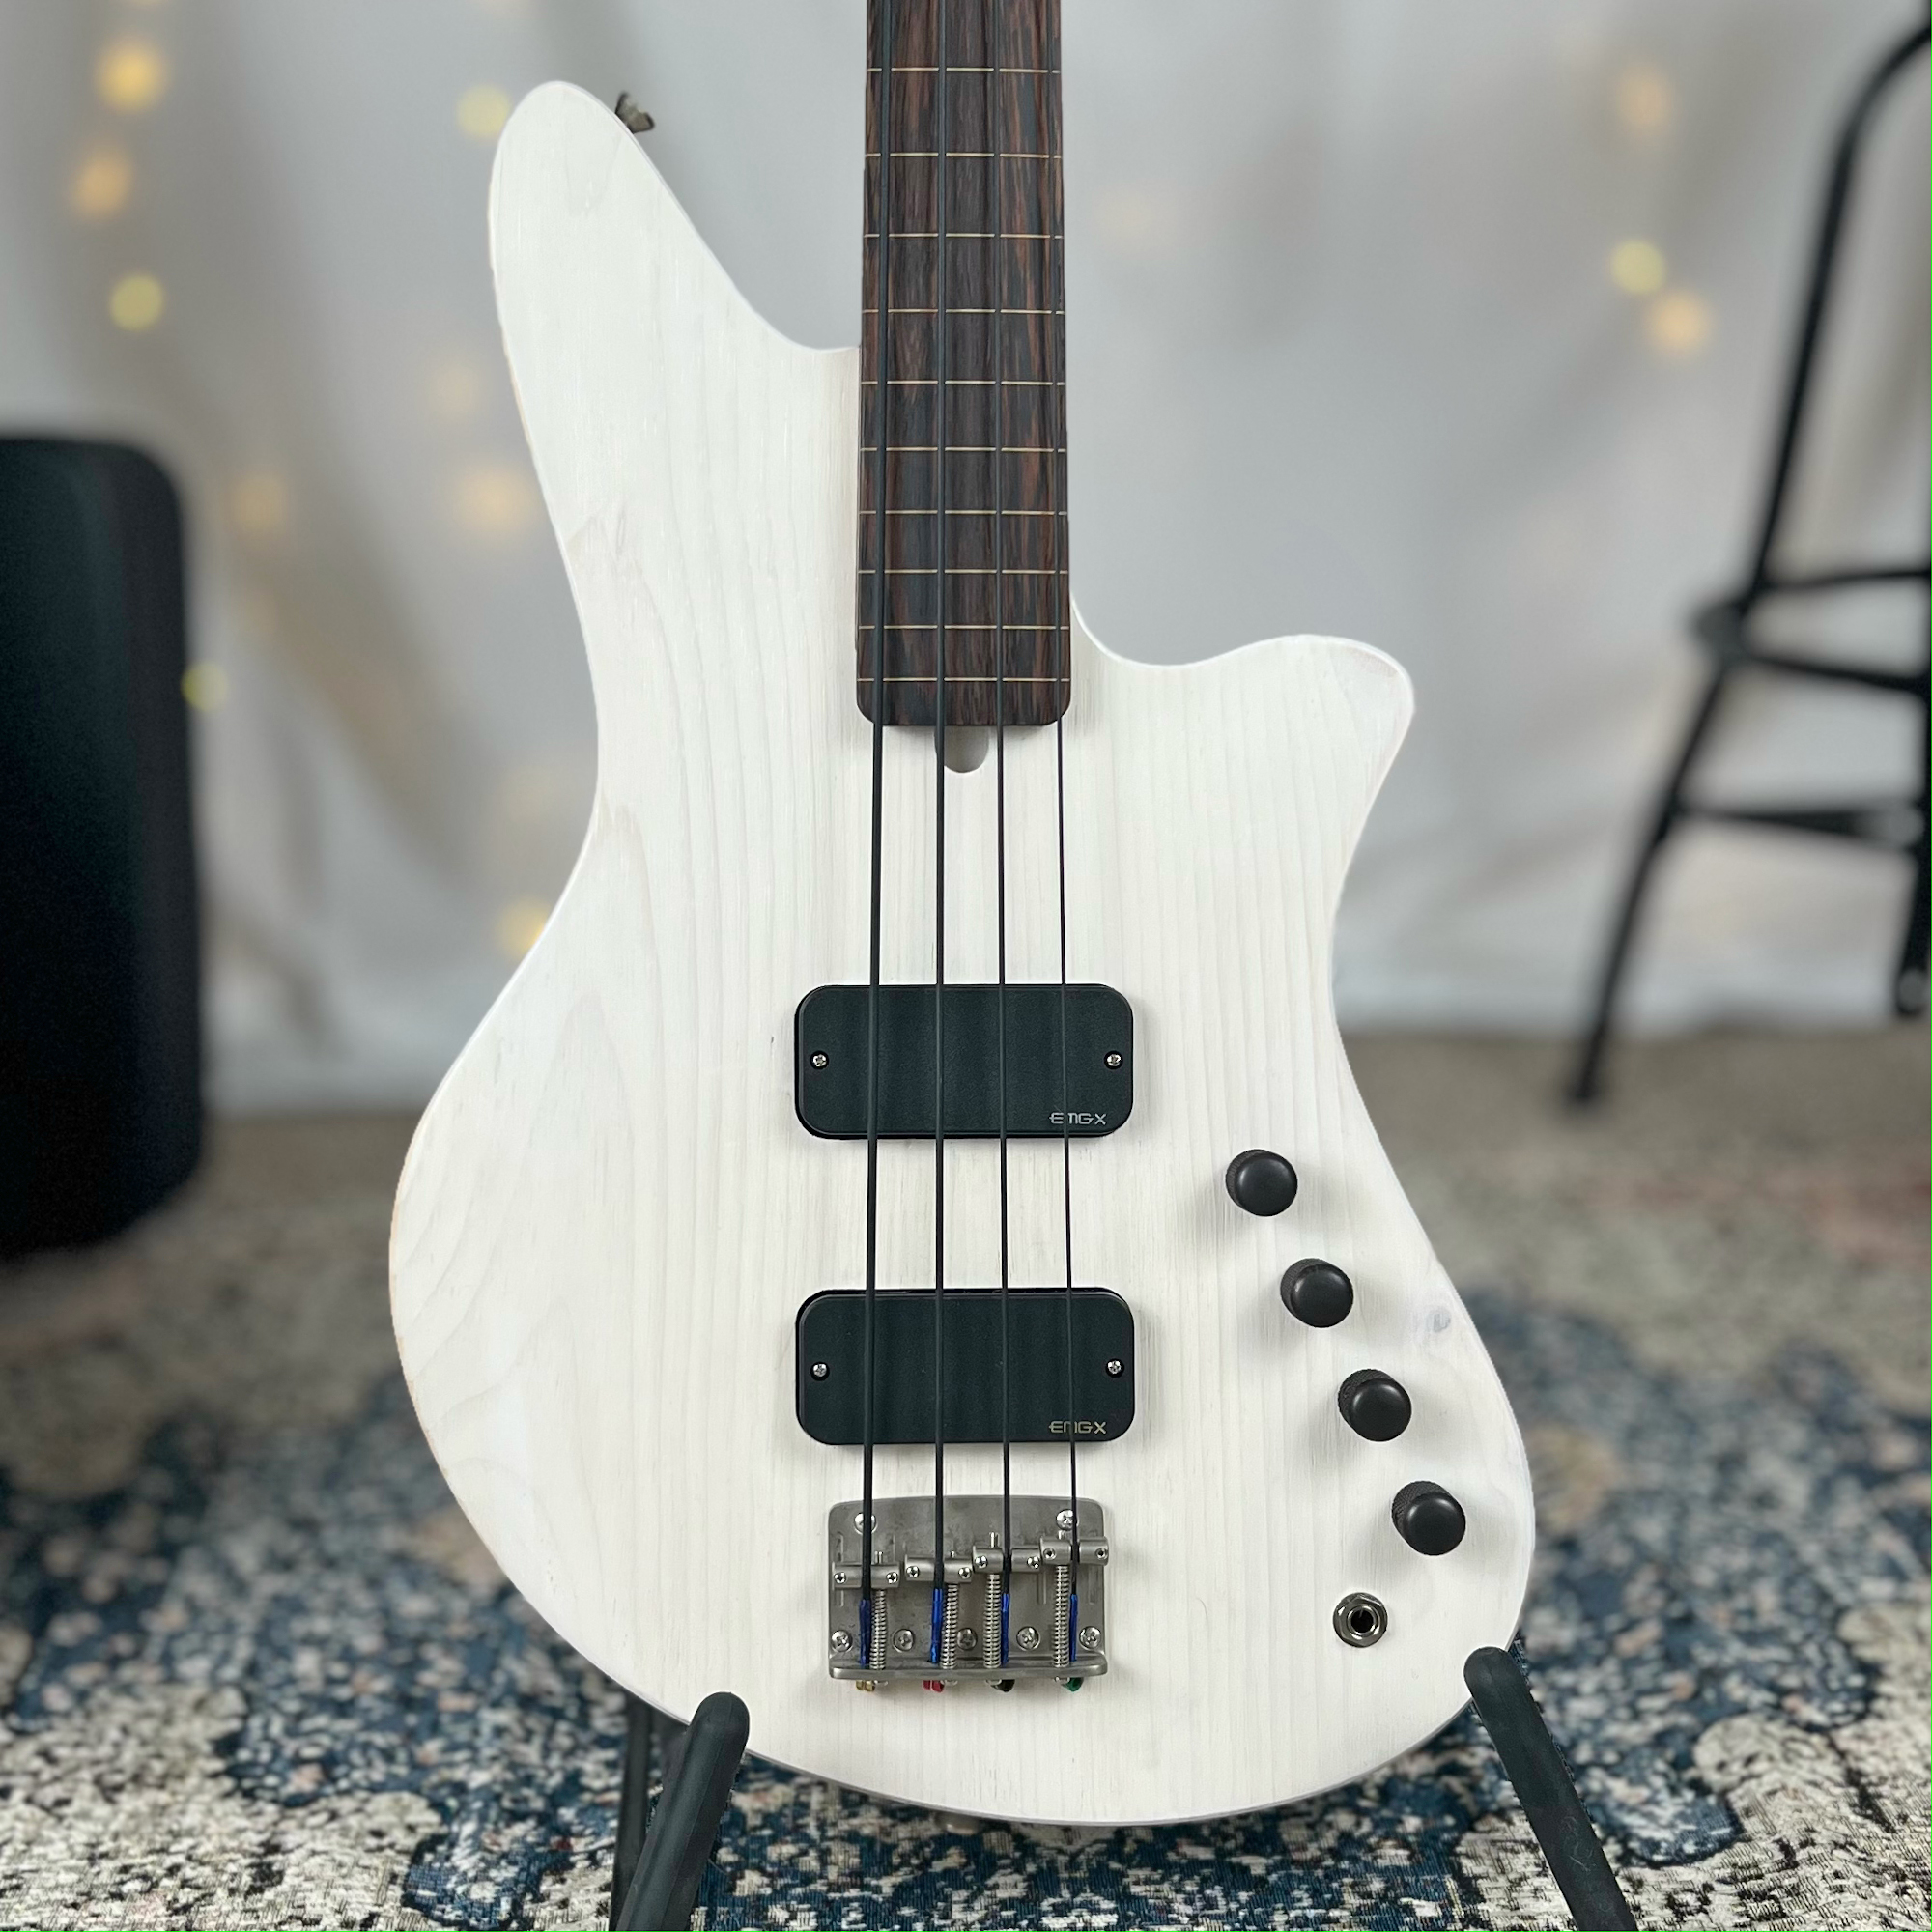 Jax 4 FL 32" Medium-Scale Bass in Ghost on Distressed Pine with EMG TBPCSX (neck)/TBPAX (bridge) (Active) Pickups and V/V/BTS (Active) Electronics